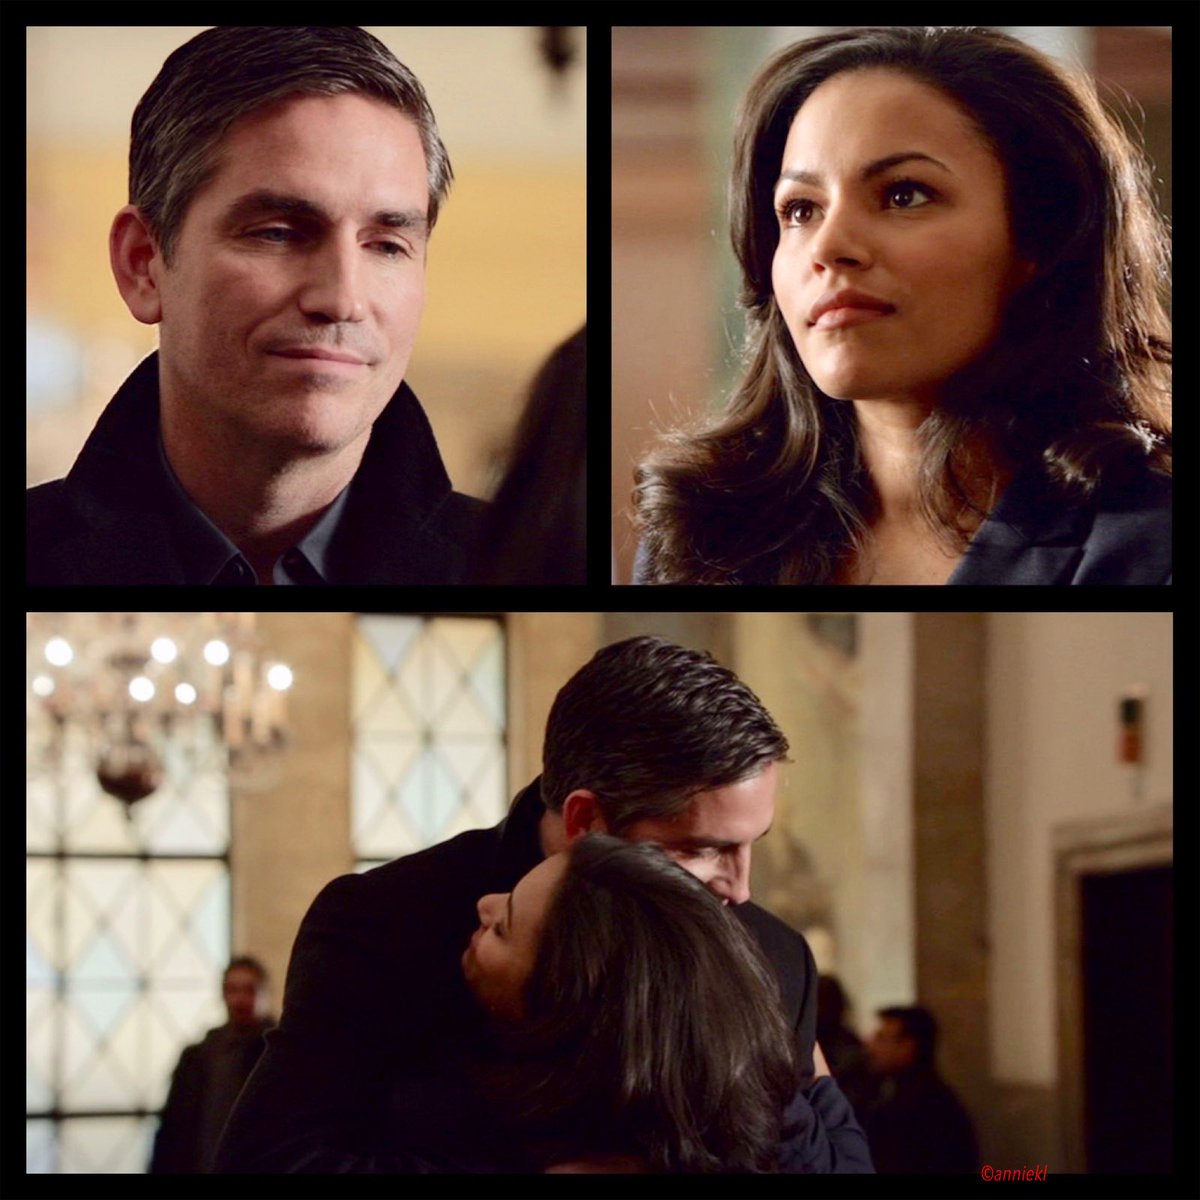 #PersonOfInterest #JimCaviezel #JohnReese 

Today’s National Say something nice Day, so don’t forget to make someones day and say something nice.....🥰
#NationalSaySomethingNiceDay